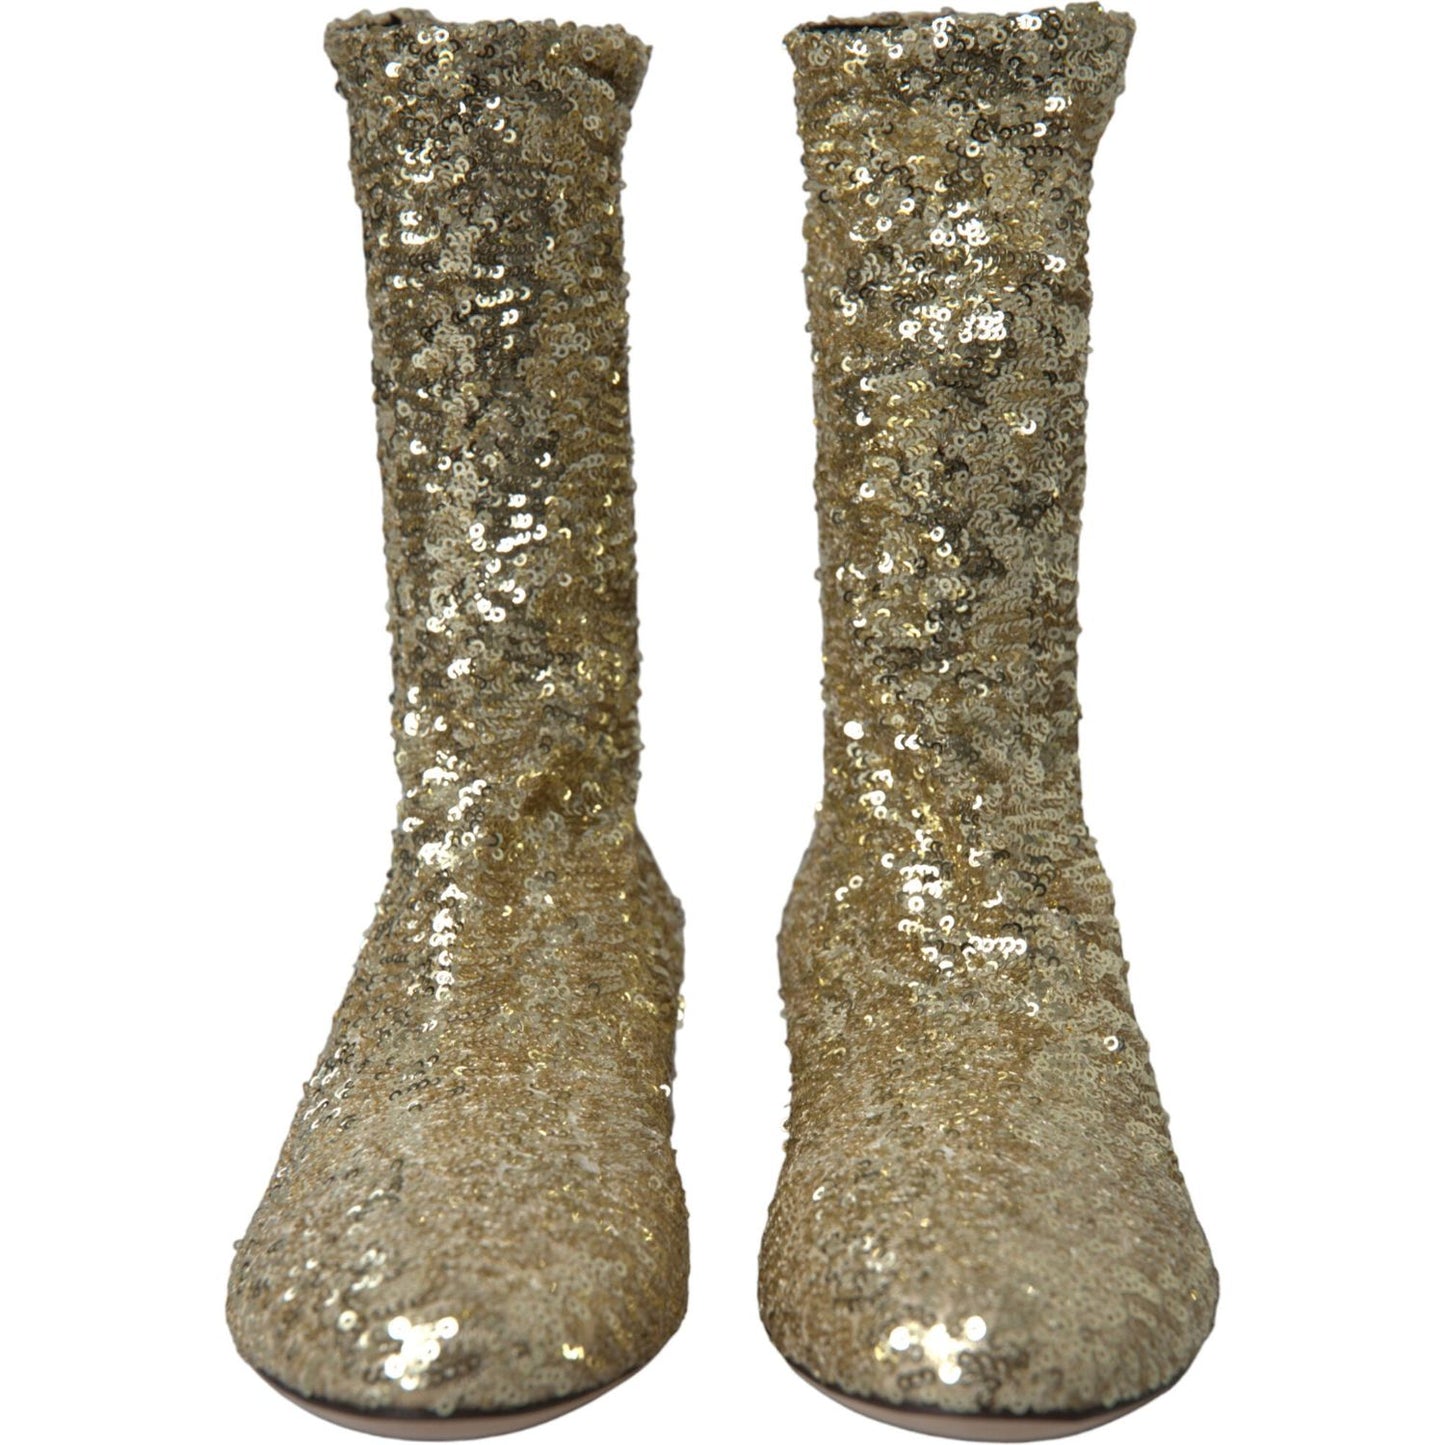 Dolce & Gabbana Elegant Mid Calf Gold Boots Exclusive Design gold-sequined-short-boots-stretch-shoes 465A9704-bg-scaled-691f9104-603.jpg